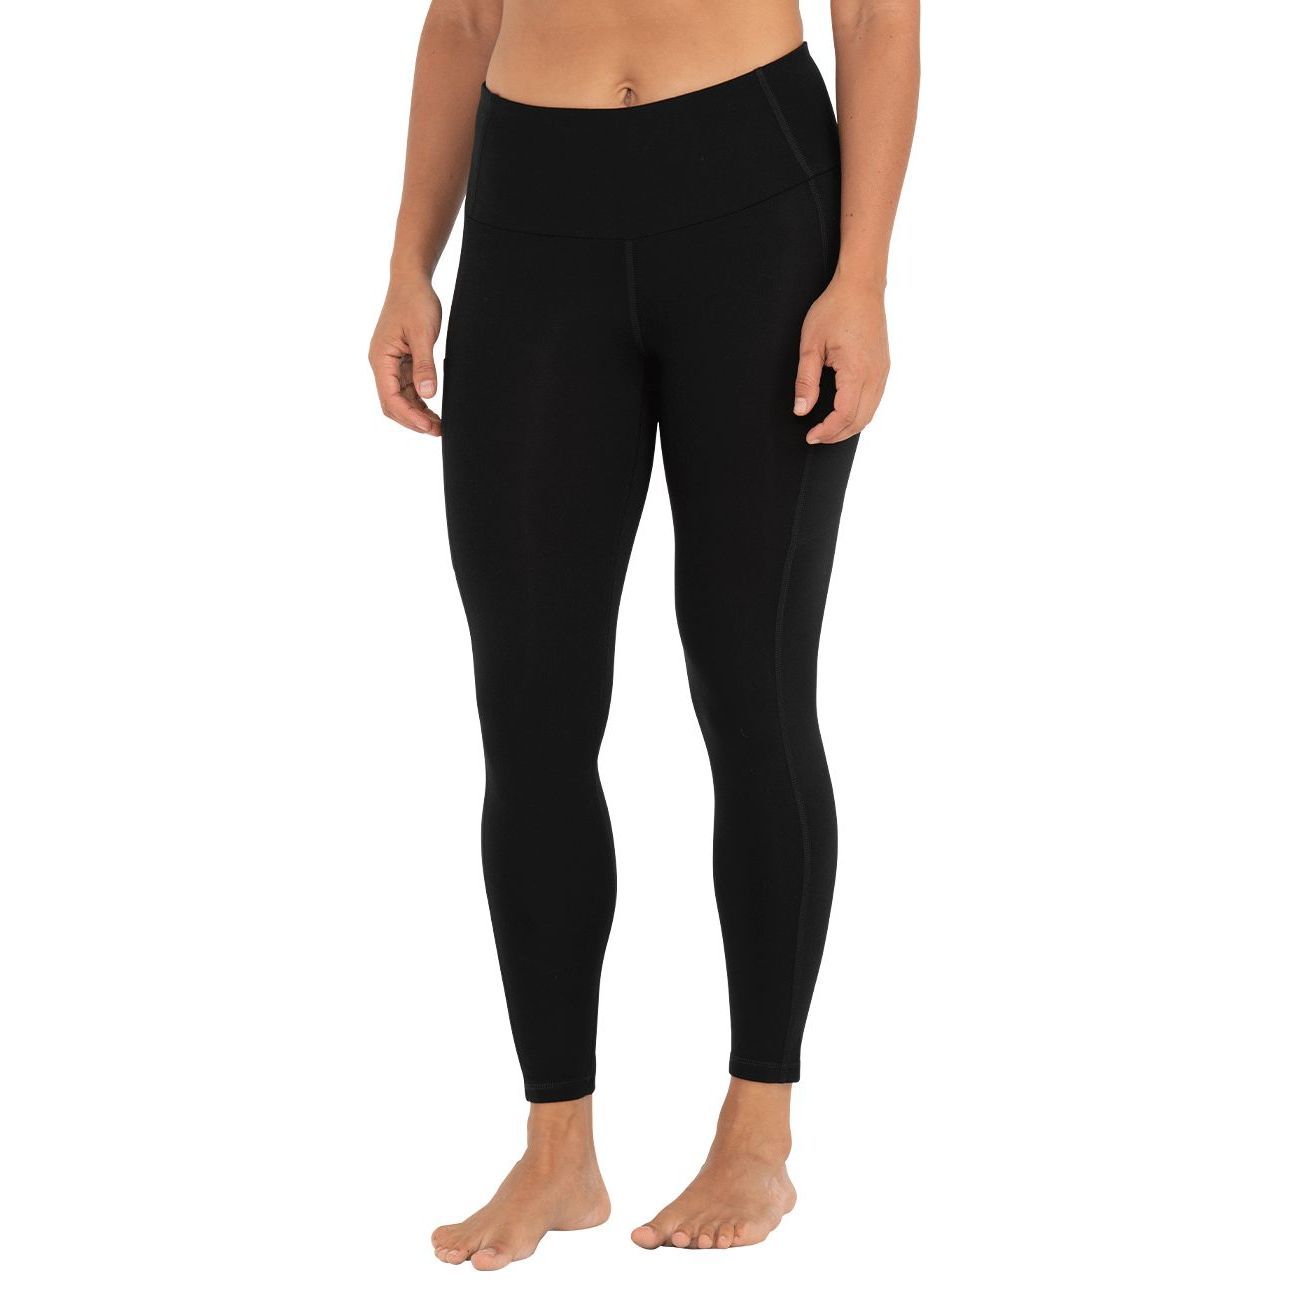 Free Fly Women's Bamboo Daily Tight Black Image 1